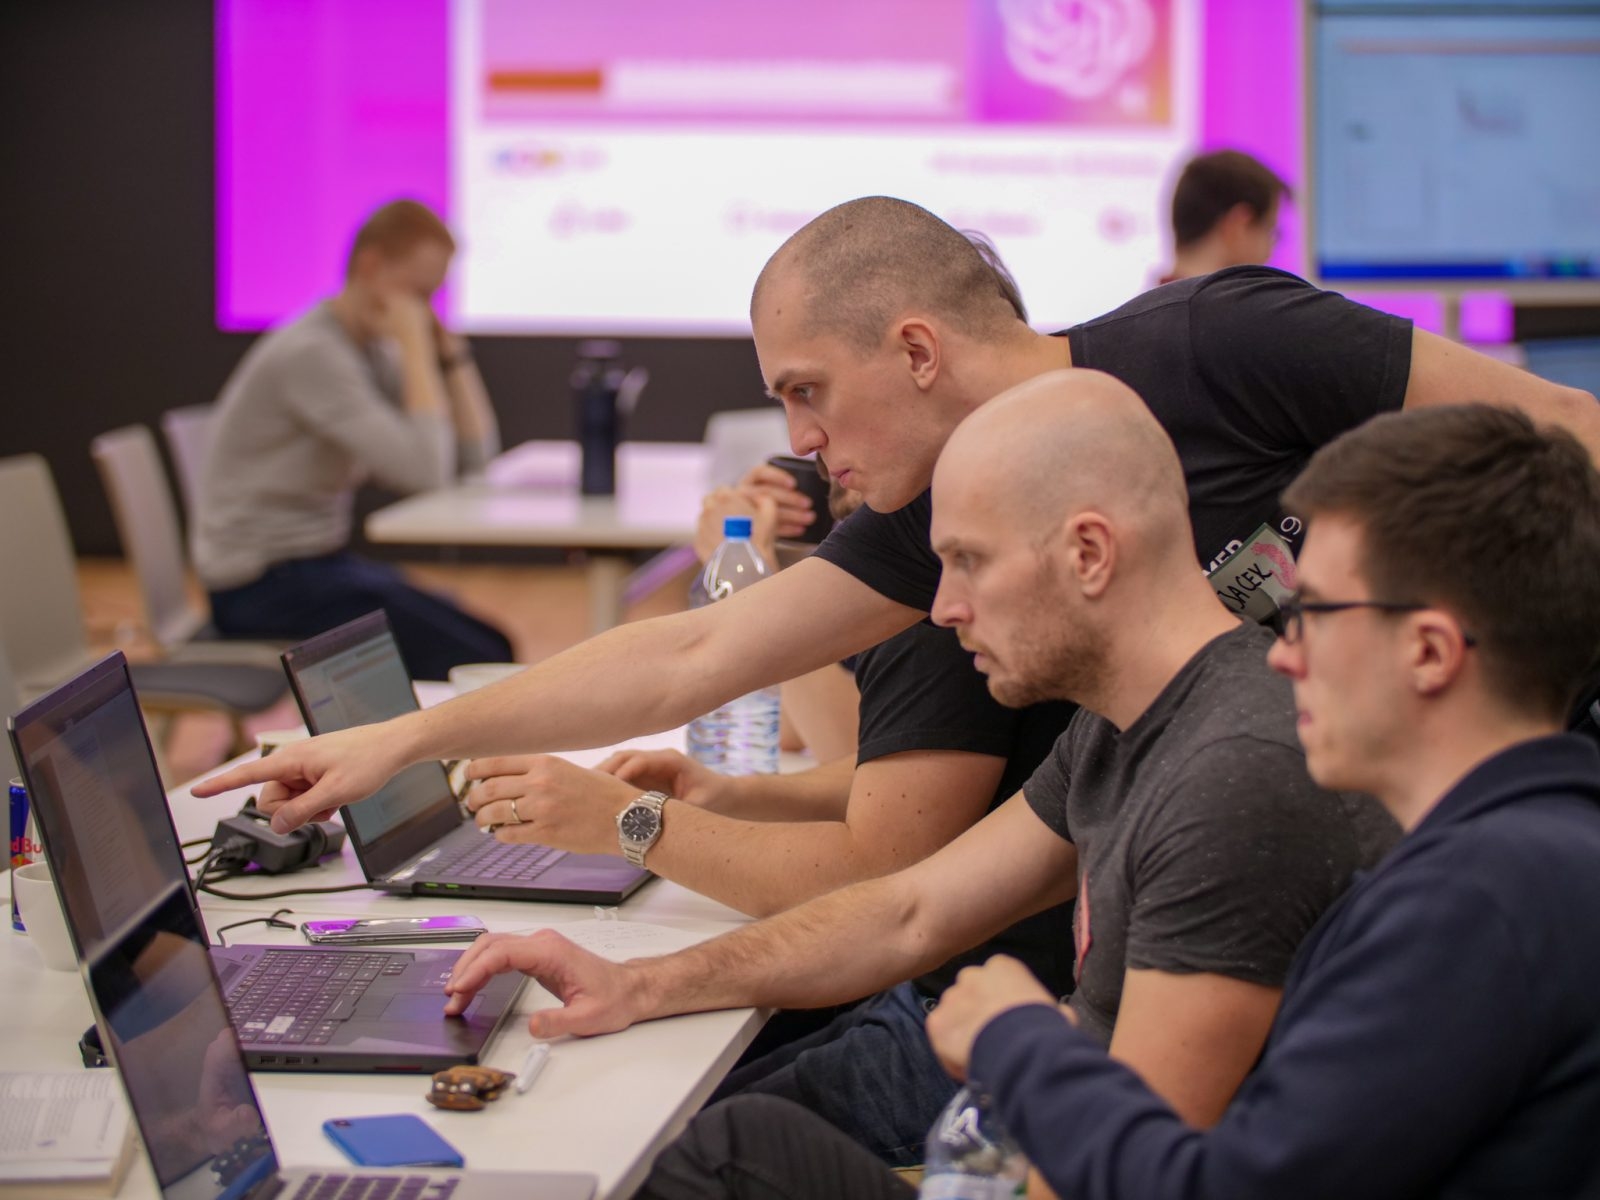 👉 The challenge of this hackathon is to come up with the most original and innovative solution using Cohere's Generate, Classify, Embed, or Multilingual Semantic Search